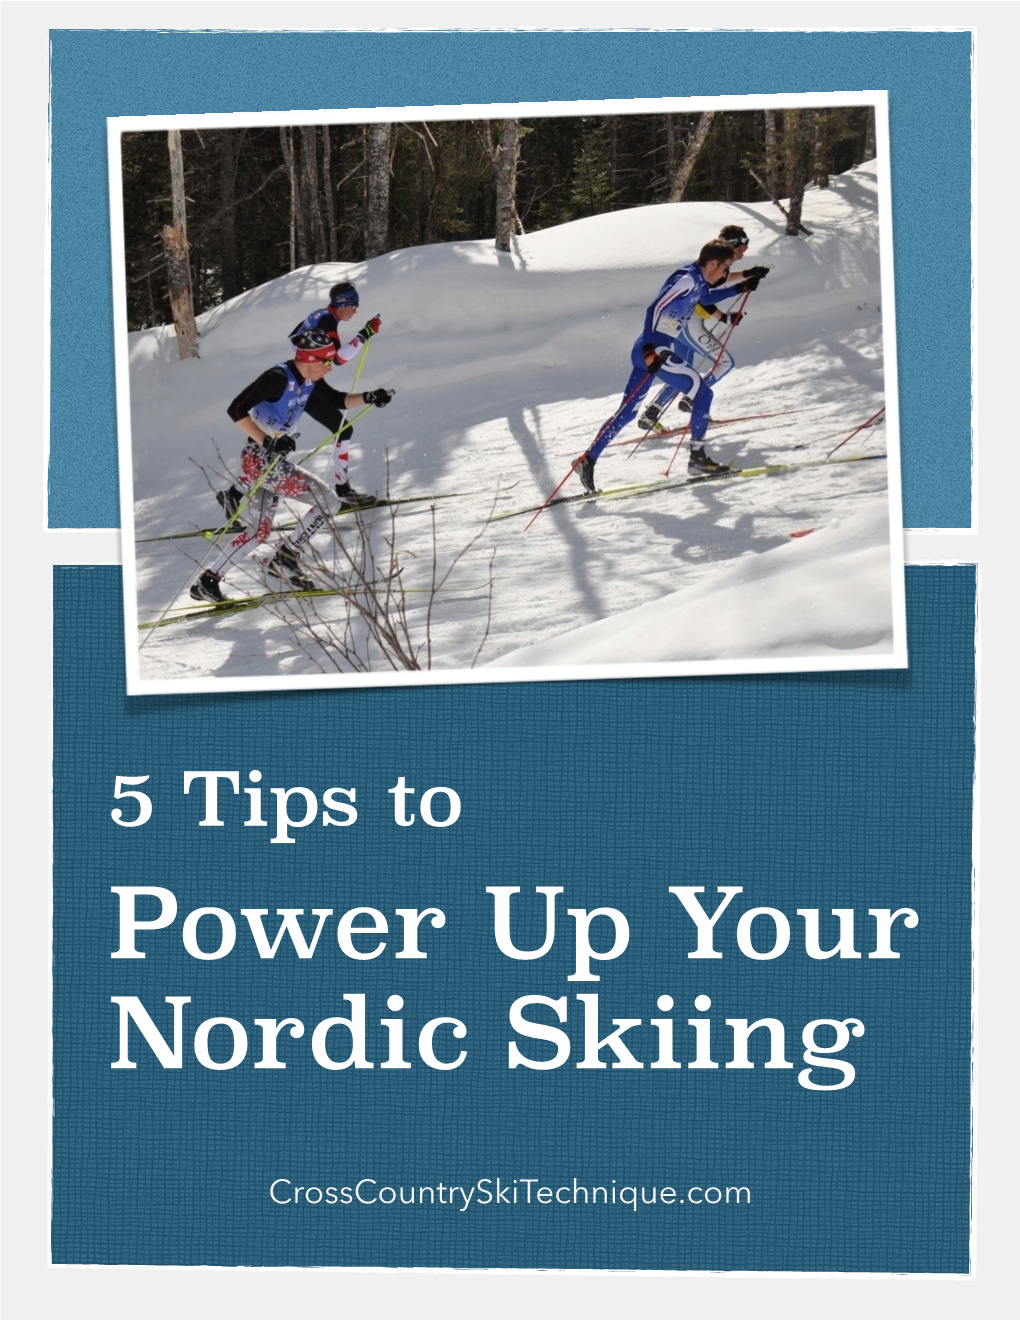 5 Tips to Power up Your Nordic Skiing